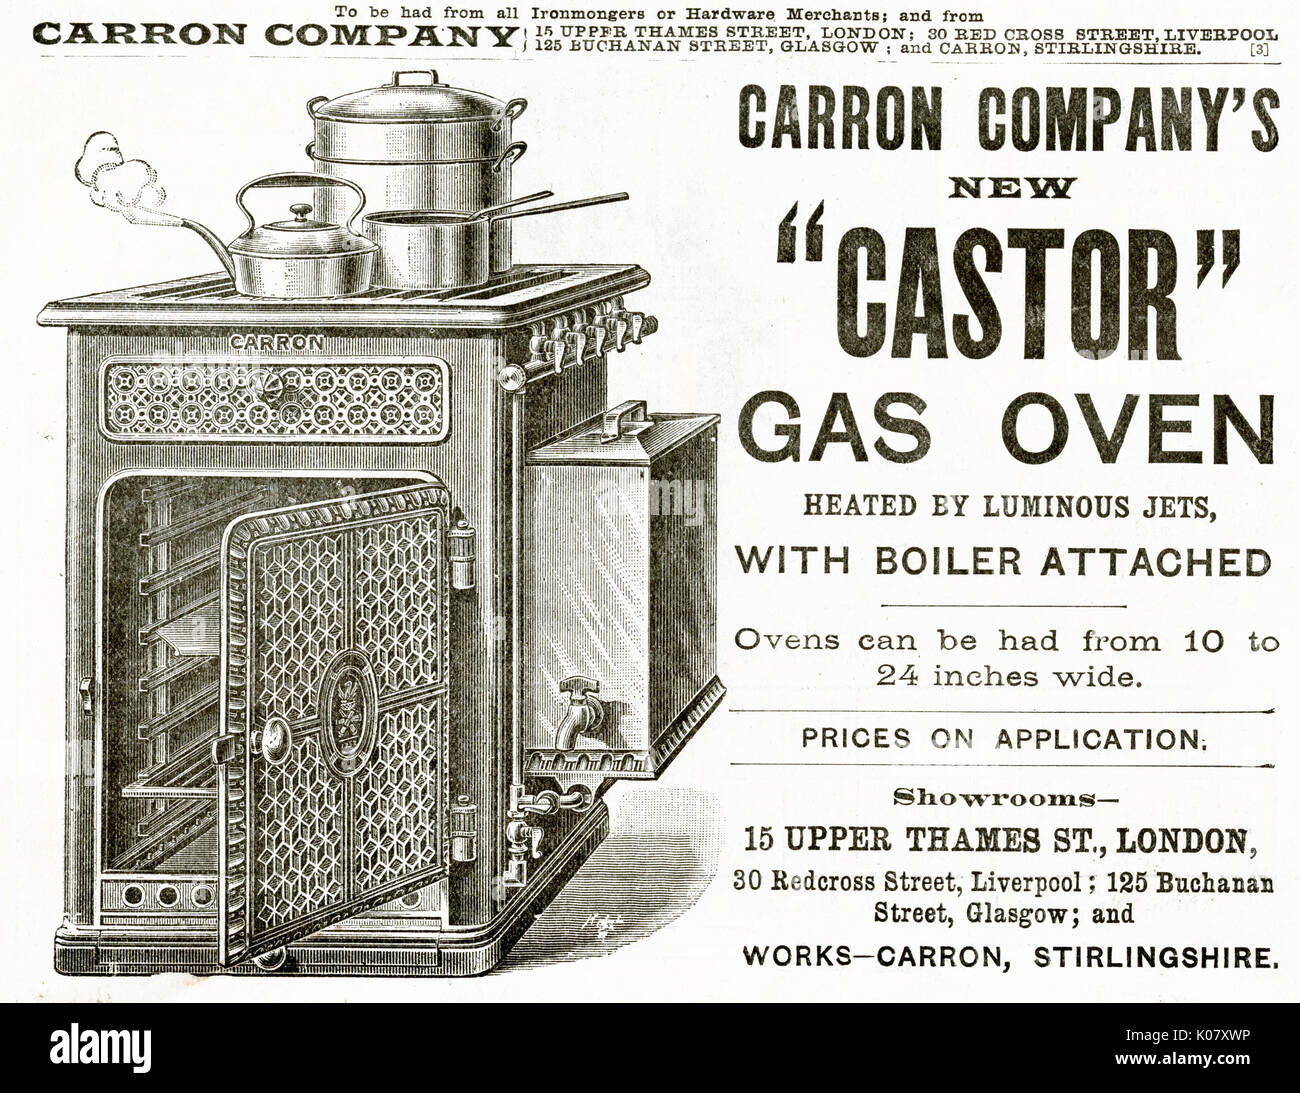 New 'Castor', gas oven, heated by luminous jets with boiler attached.      Date: 1889 Stock Photo